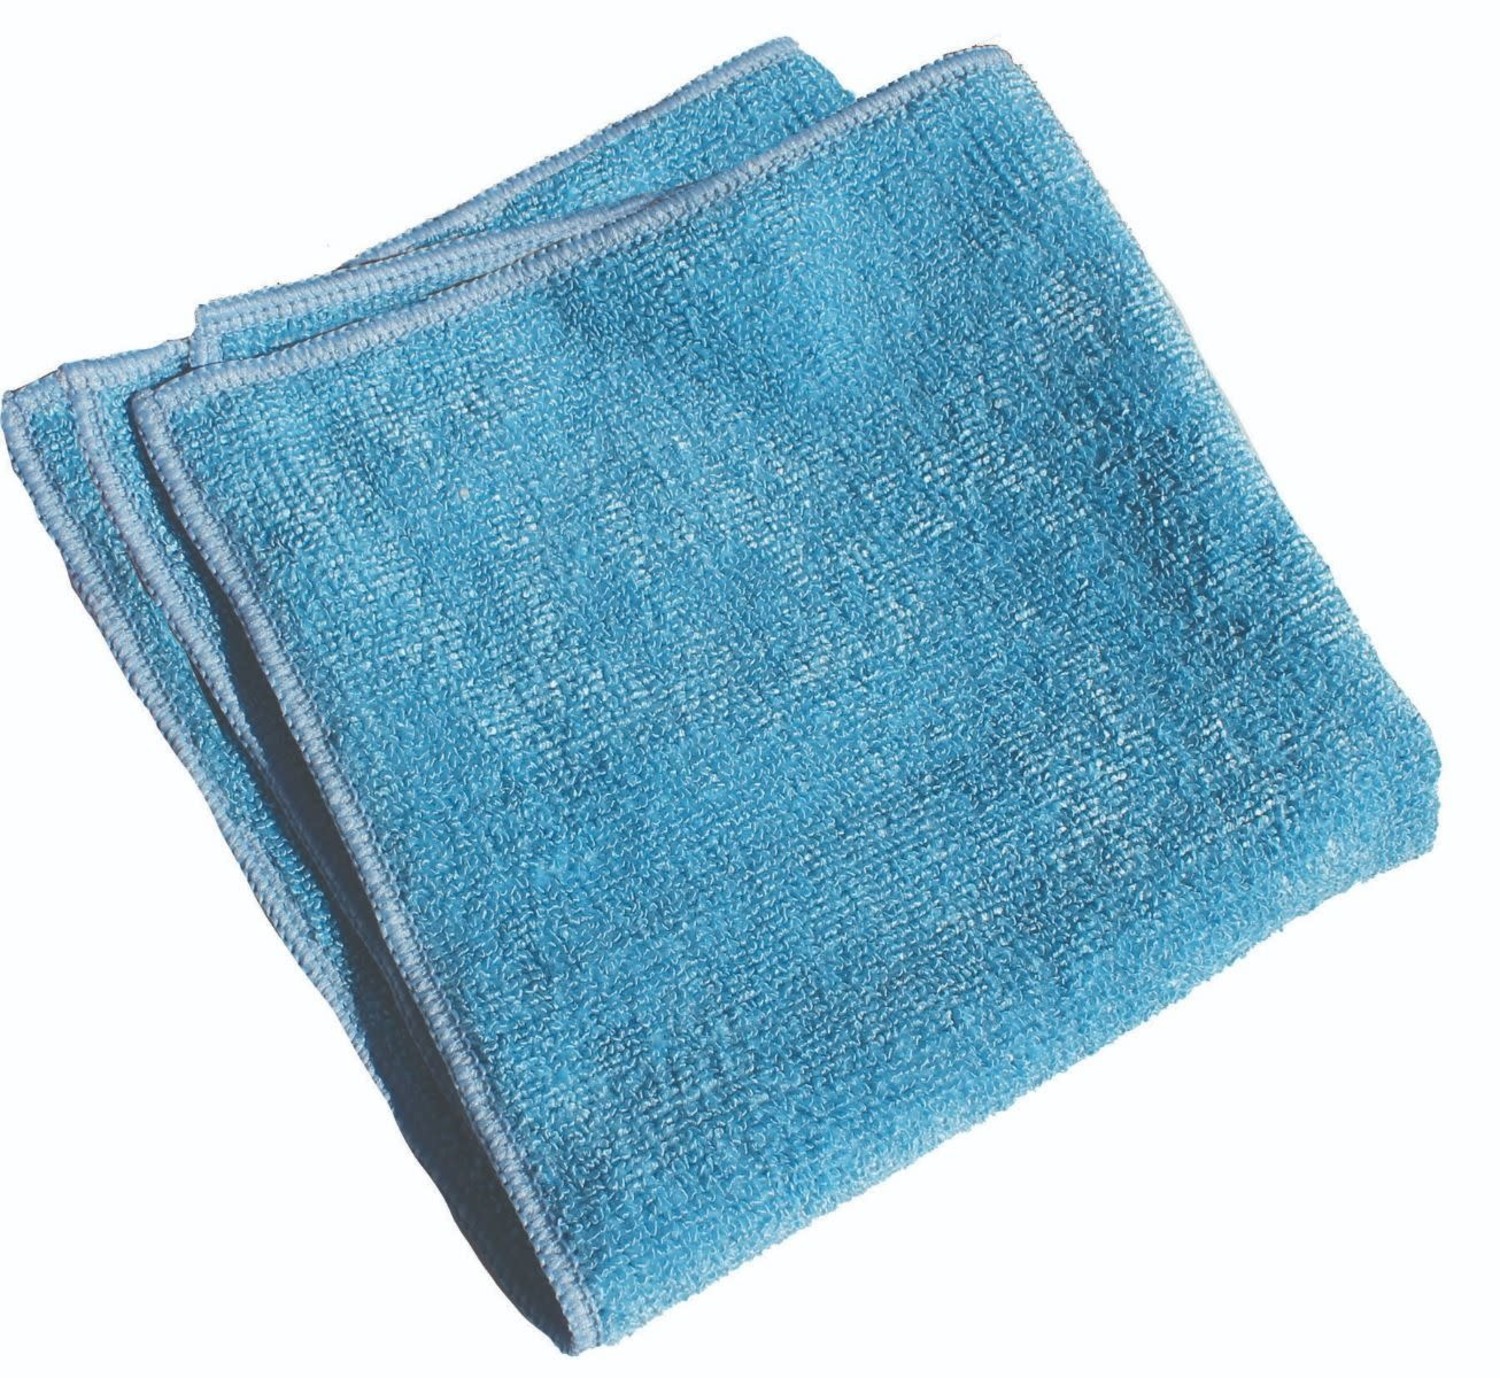 E-Cloth Cleaning Cloth - Whisk